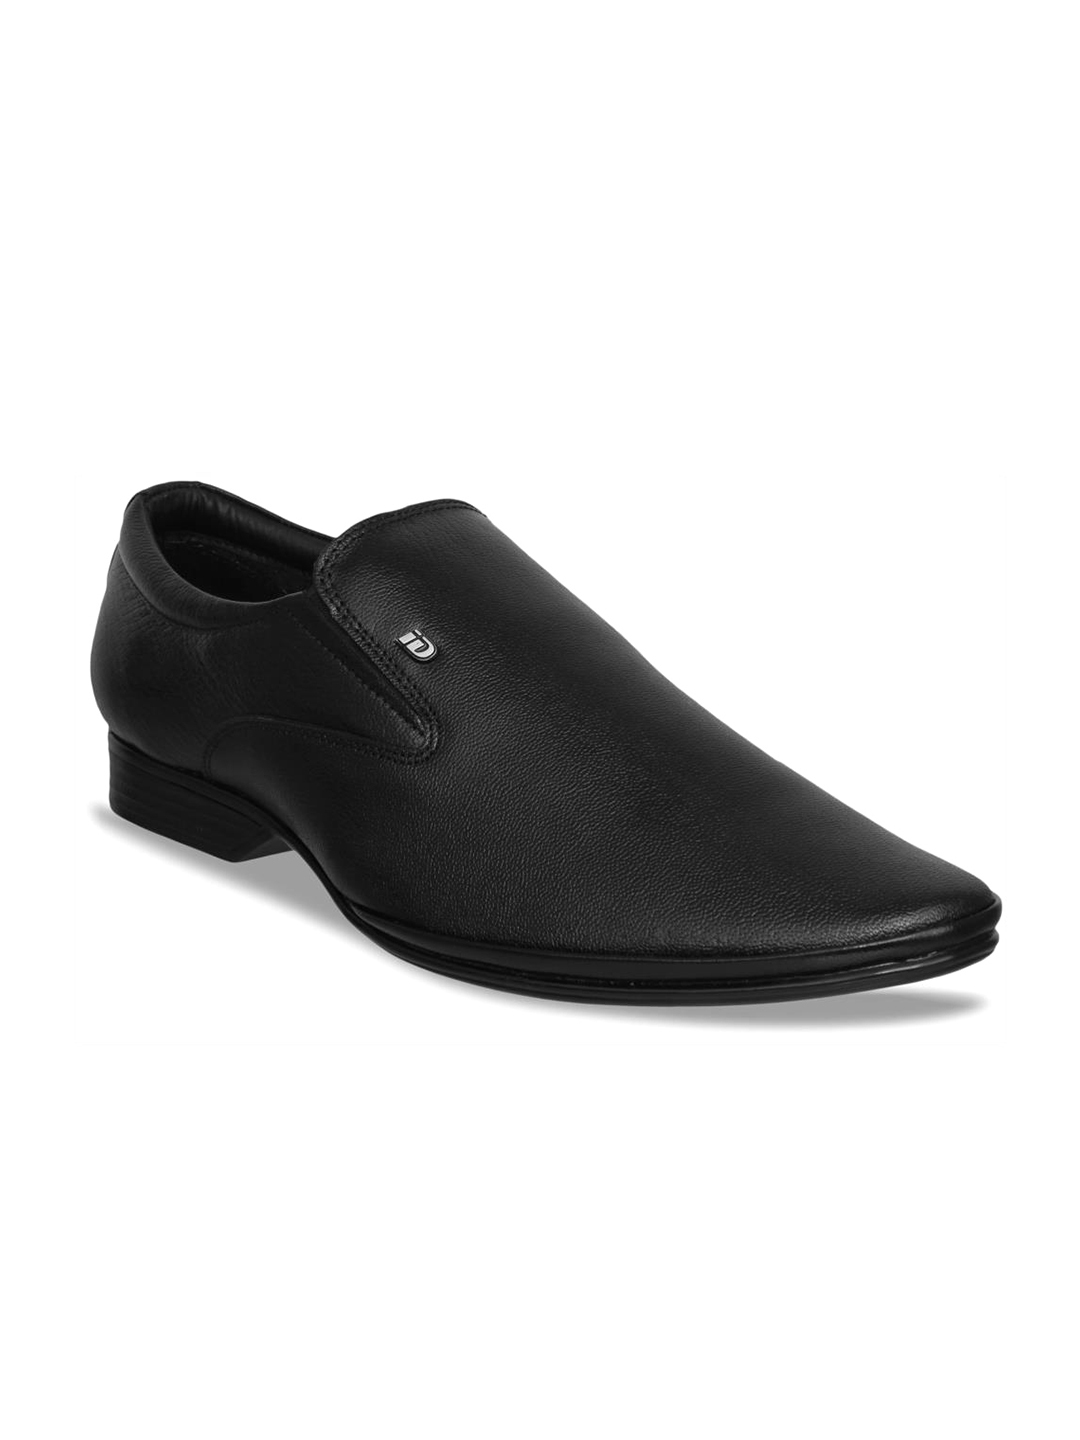 id low top formal shoes